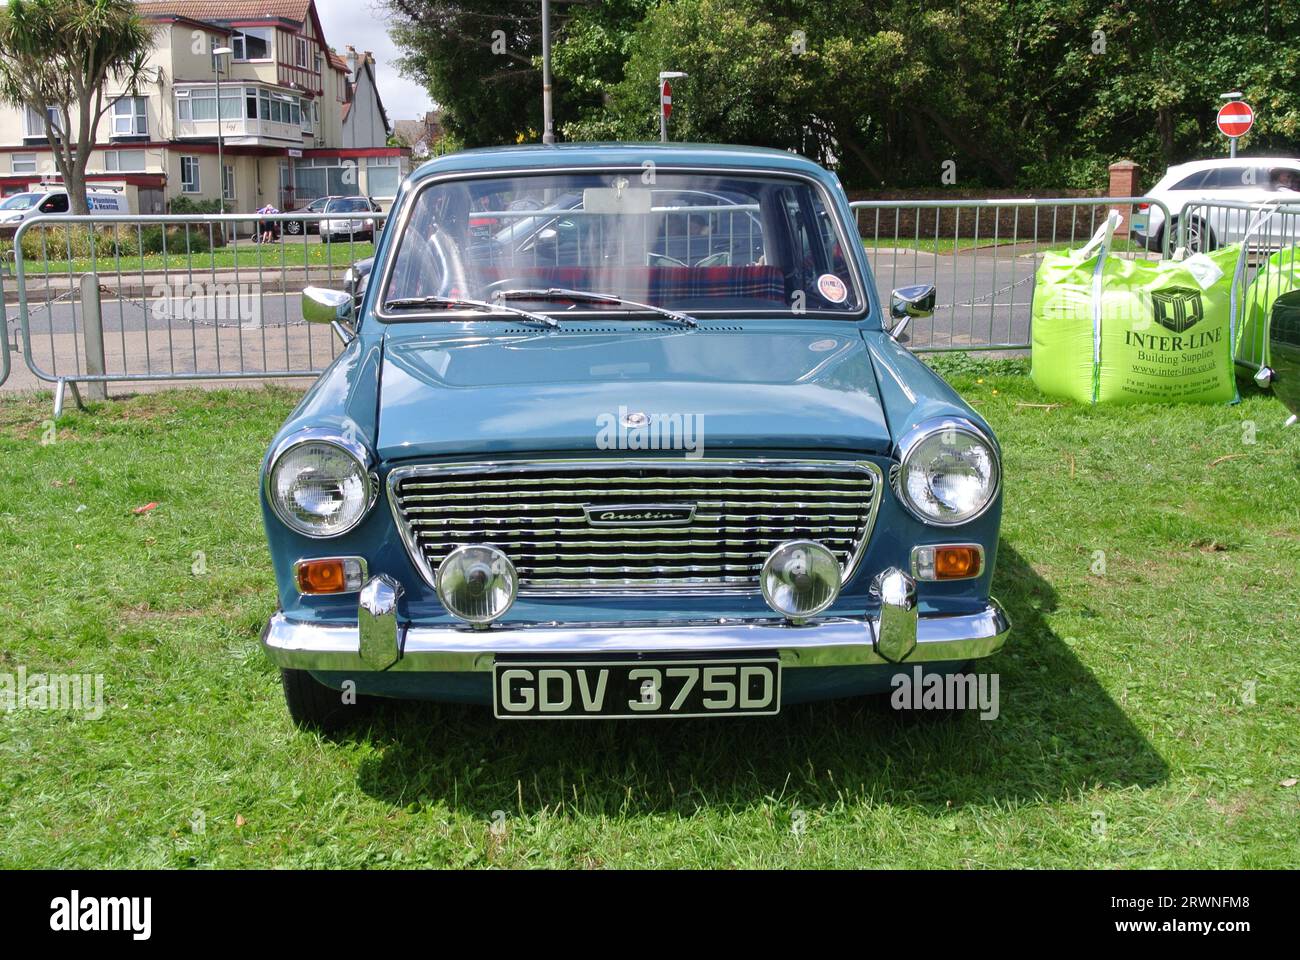 Austin 1100 parked up on display at the English Riviera classic car show Paignton, Devon, England, UK Stock Photo